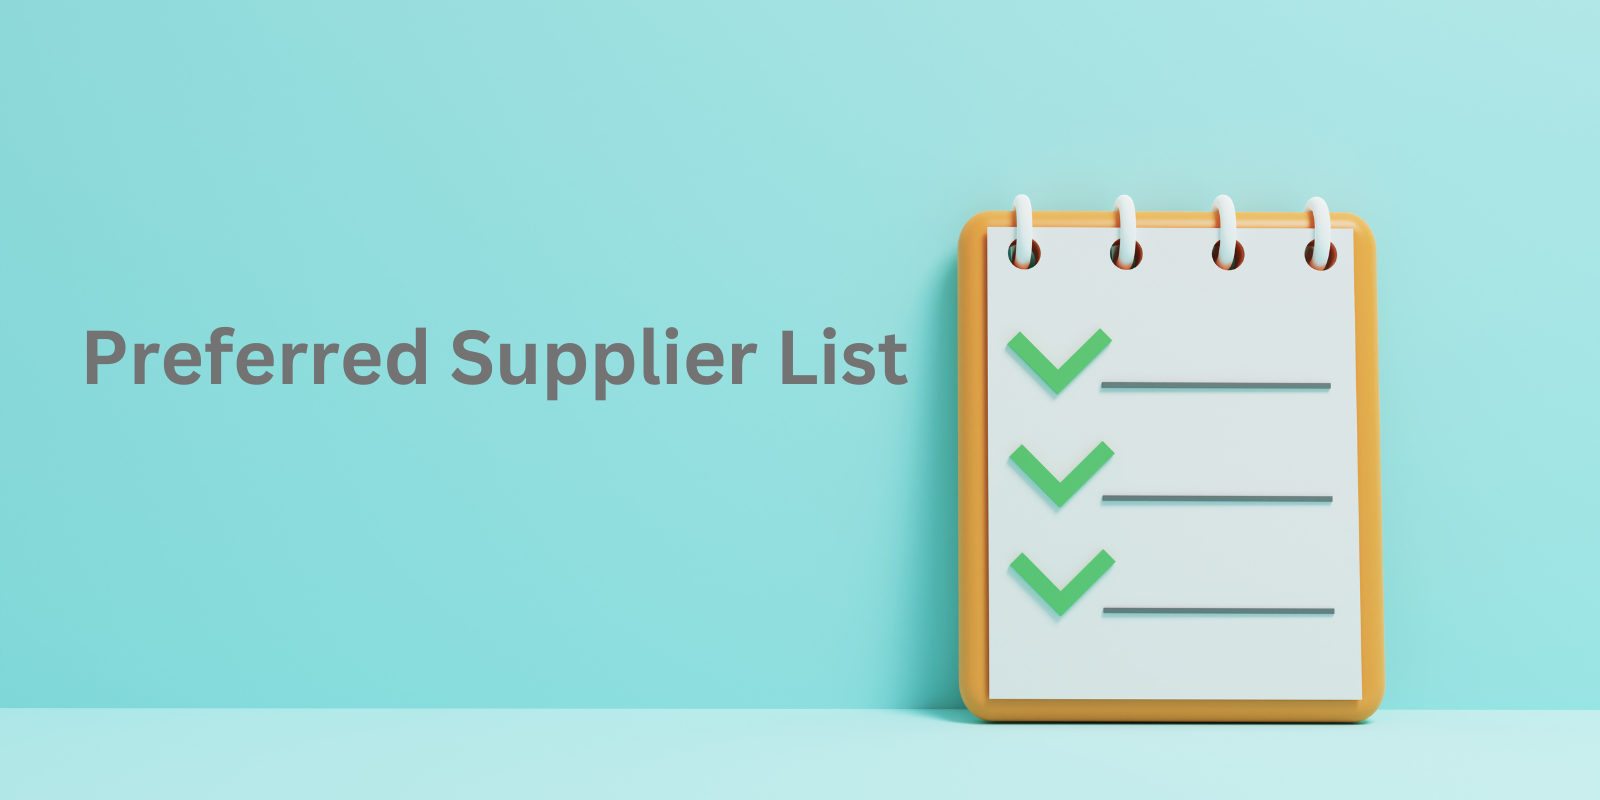 What is a PSL (Preferred Supplier List)?